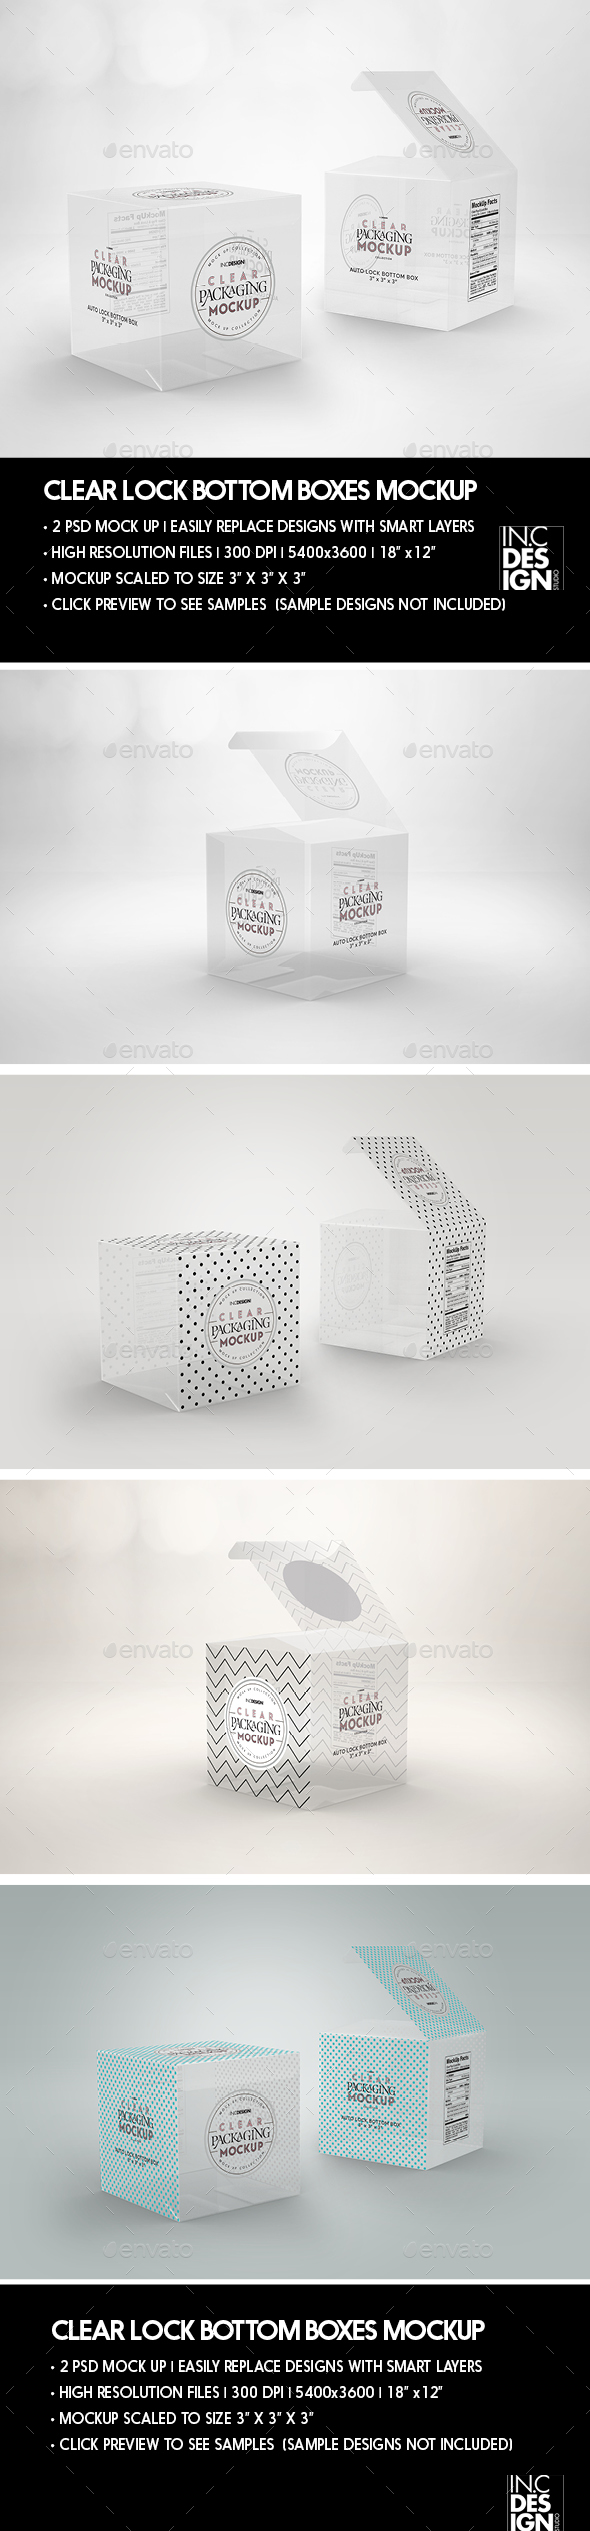 Download Clear Lock Bottom Boxes Packaging Mockup By Incybautista Graphicriver